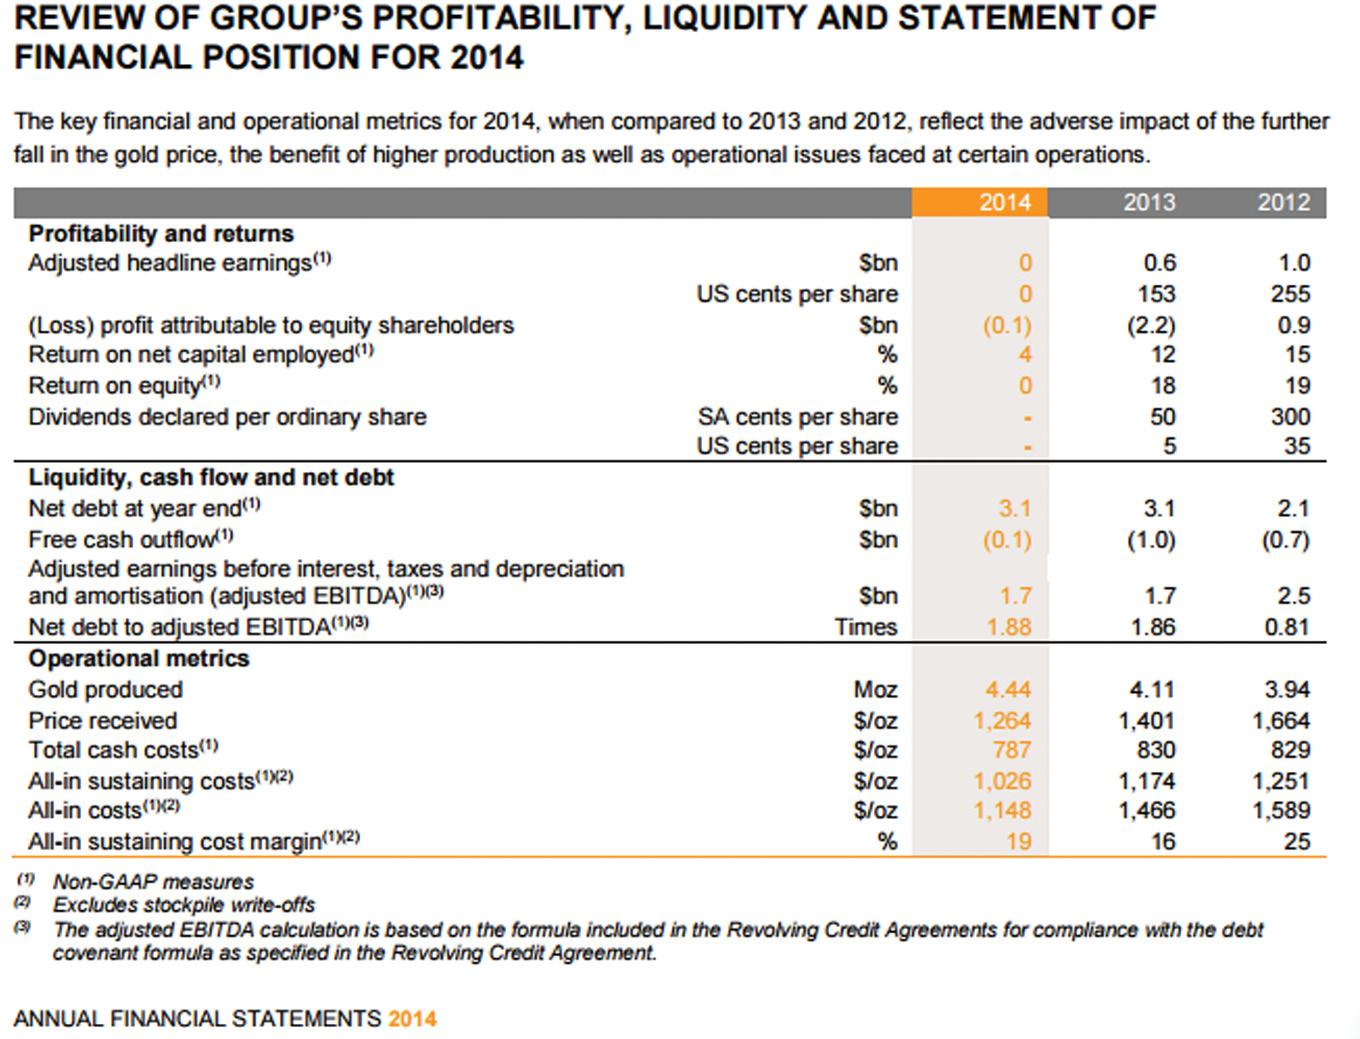 Review of group's profitability 2014